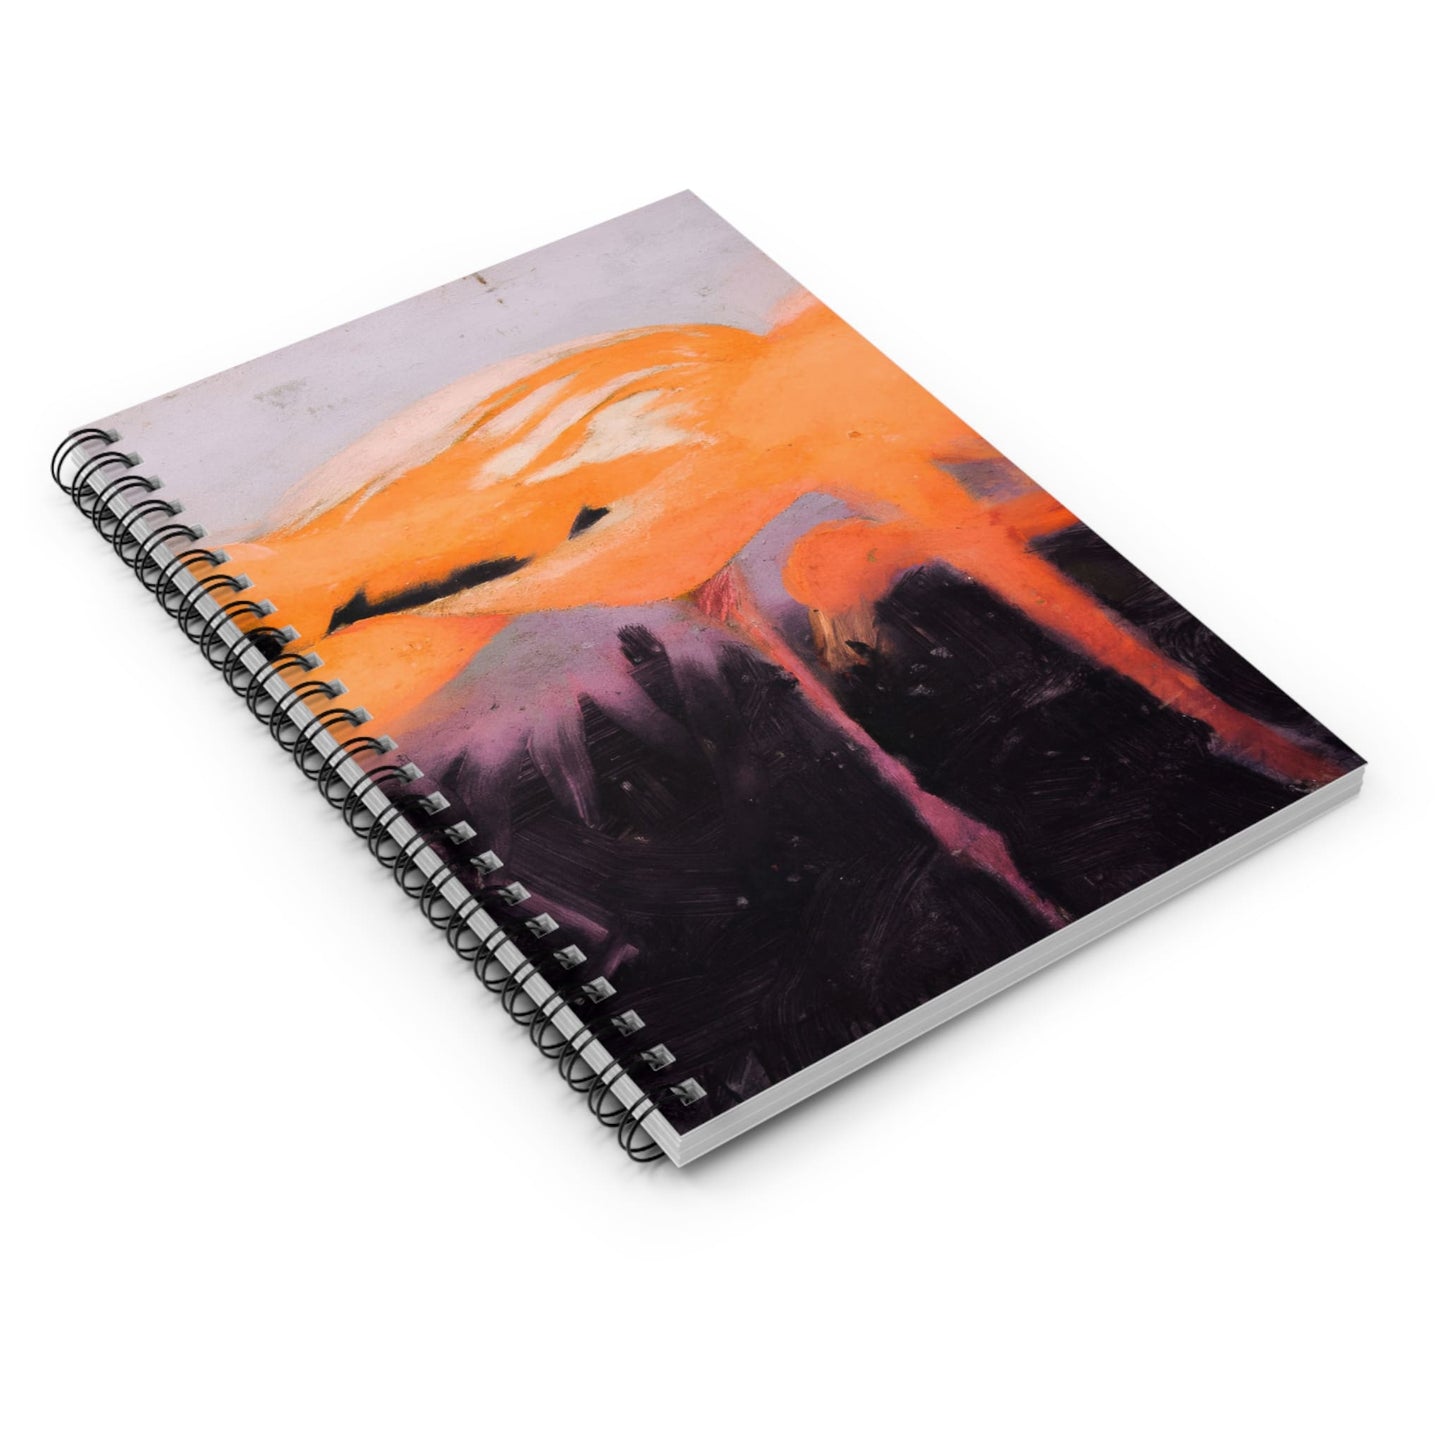 Abstract Wild Birds Spiral Notebook Laying Flat on White Surface